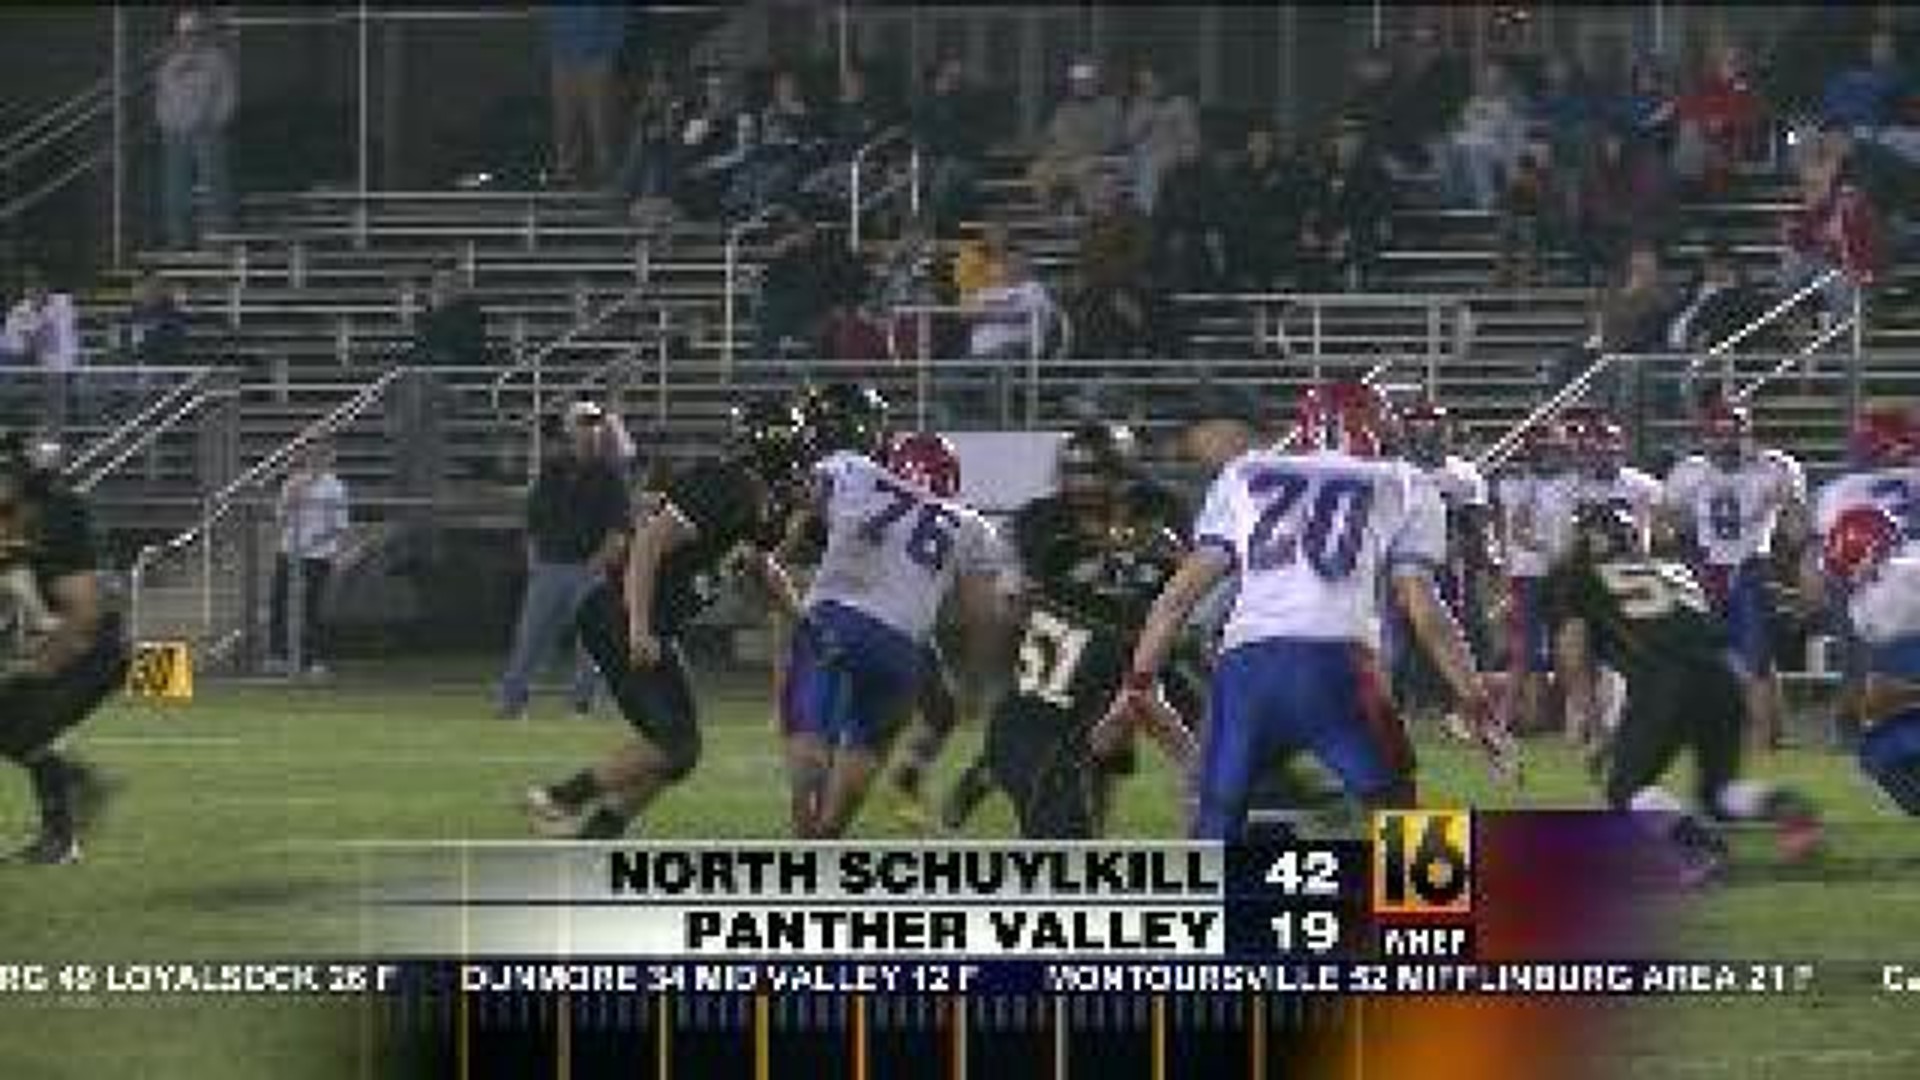 North Schuylkill vs. Panther Valley